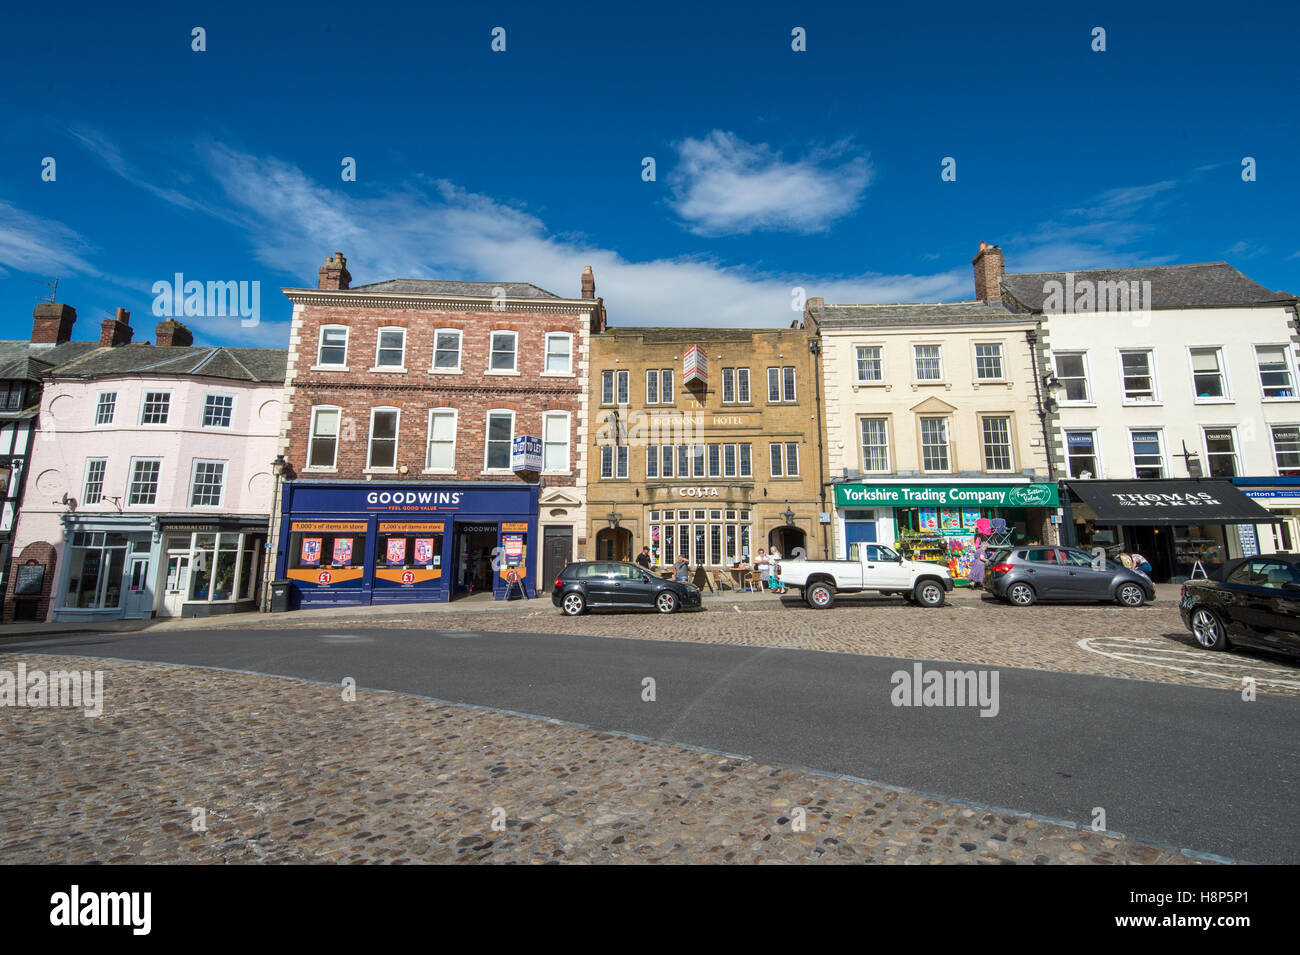 UK, England, Yorkshire, Richmond - A strip of local shops in the city of Richmond located in Northern Yorkshire. Stock Photo